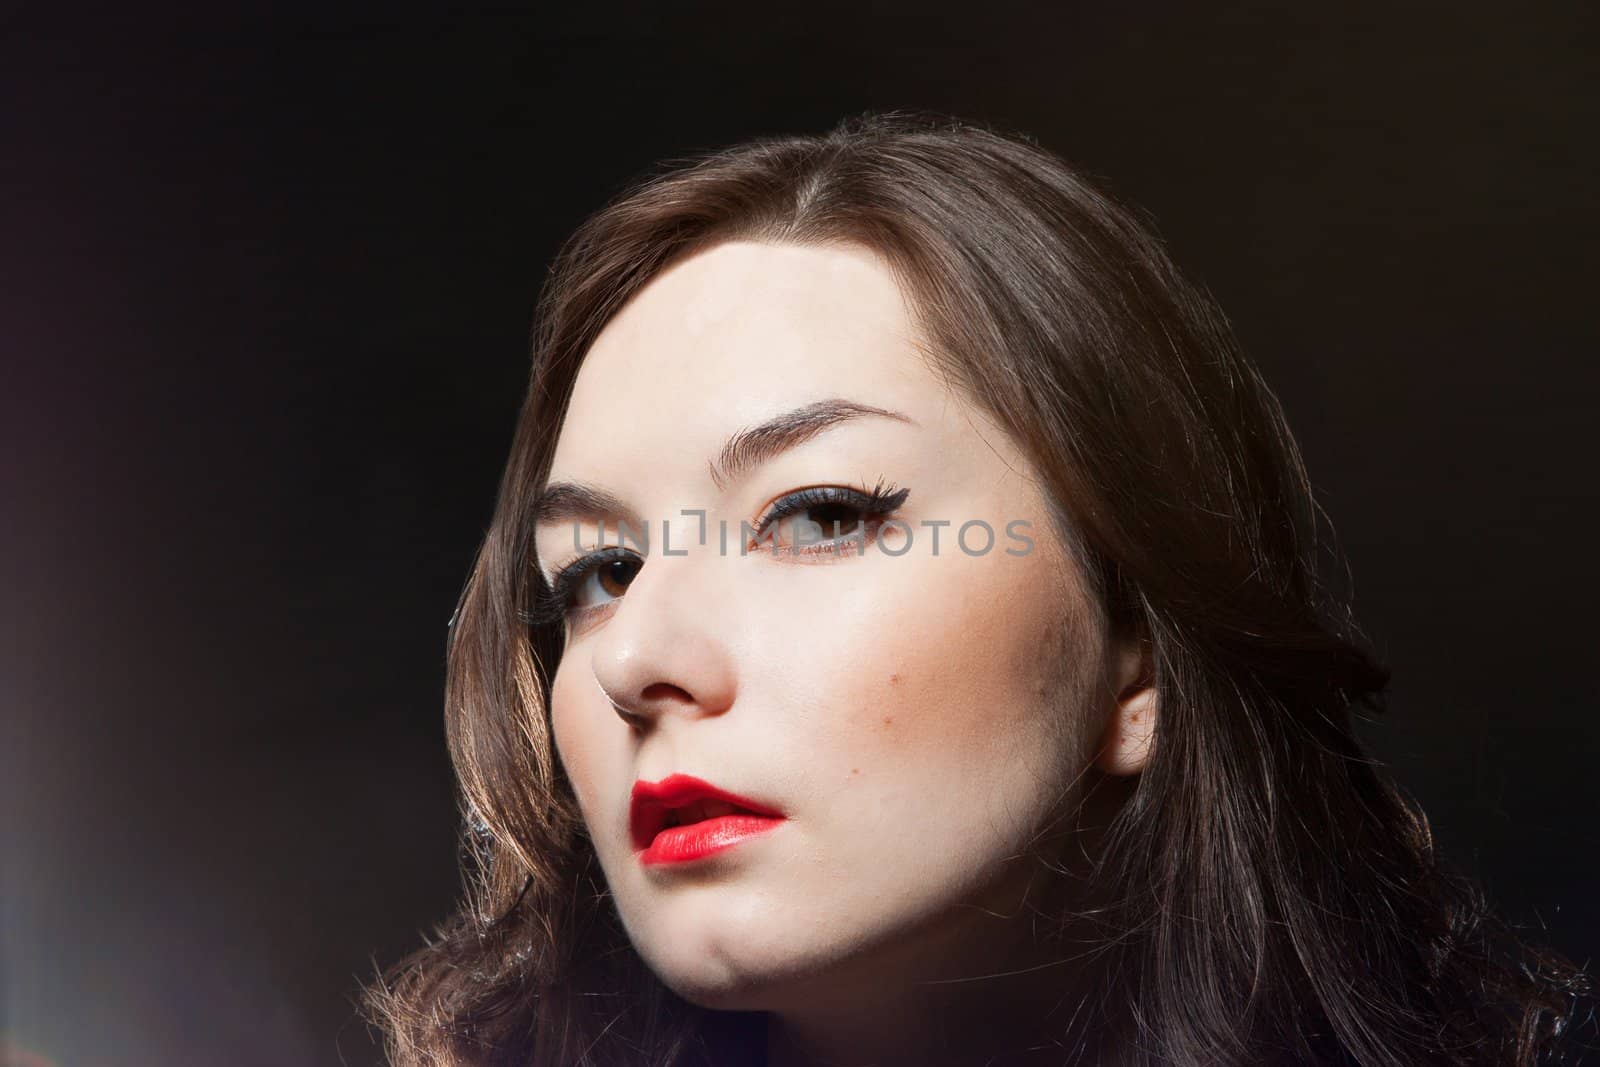 portrait of sensual young woman on dark background by nigerfoxy